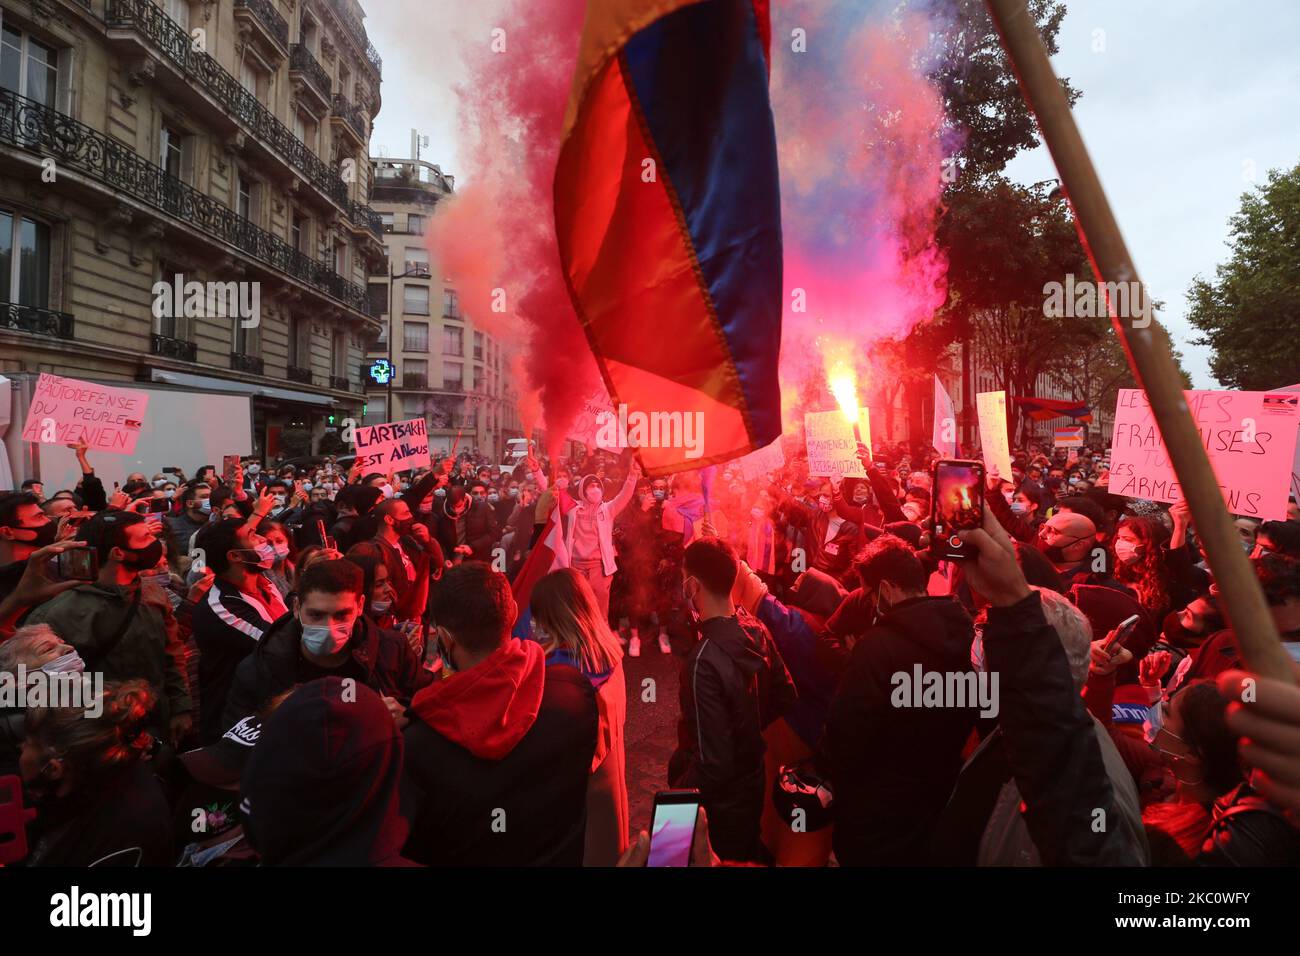 Armenians, carrying smoke bombs and flags in the colors of Armenia take part in a demonstration of Armenians in front of the Azerbaijan ambassy in Paris, France, on September 29, 2020 against the Azerbayan attacks on Nagorno Karabakh. (Photo by Michel Stoupak/NurPhoto) Stock Photo